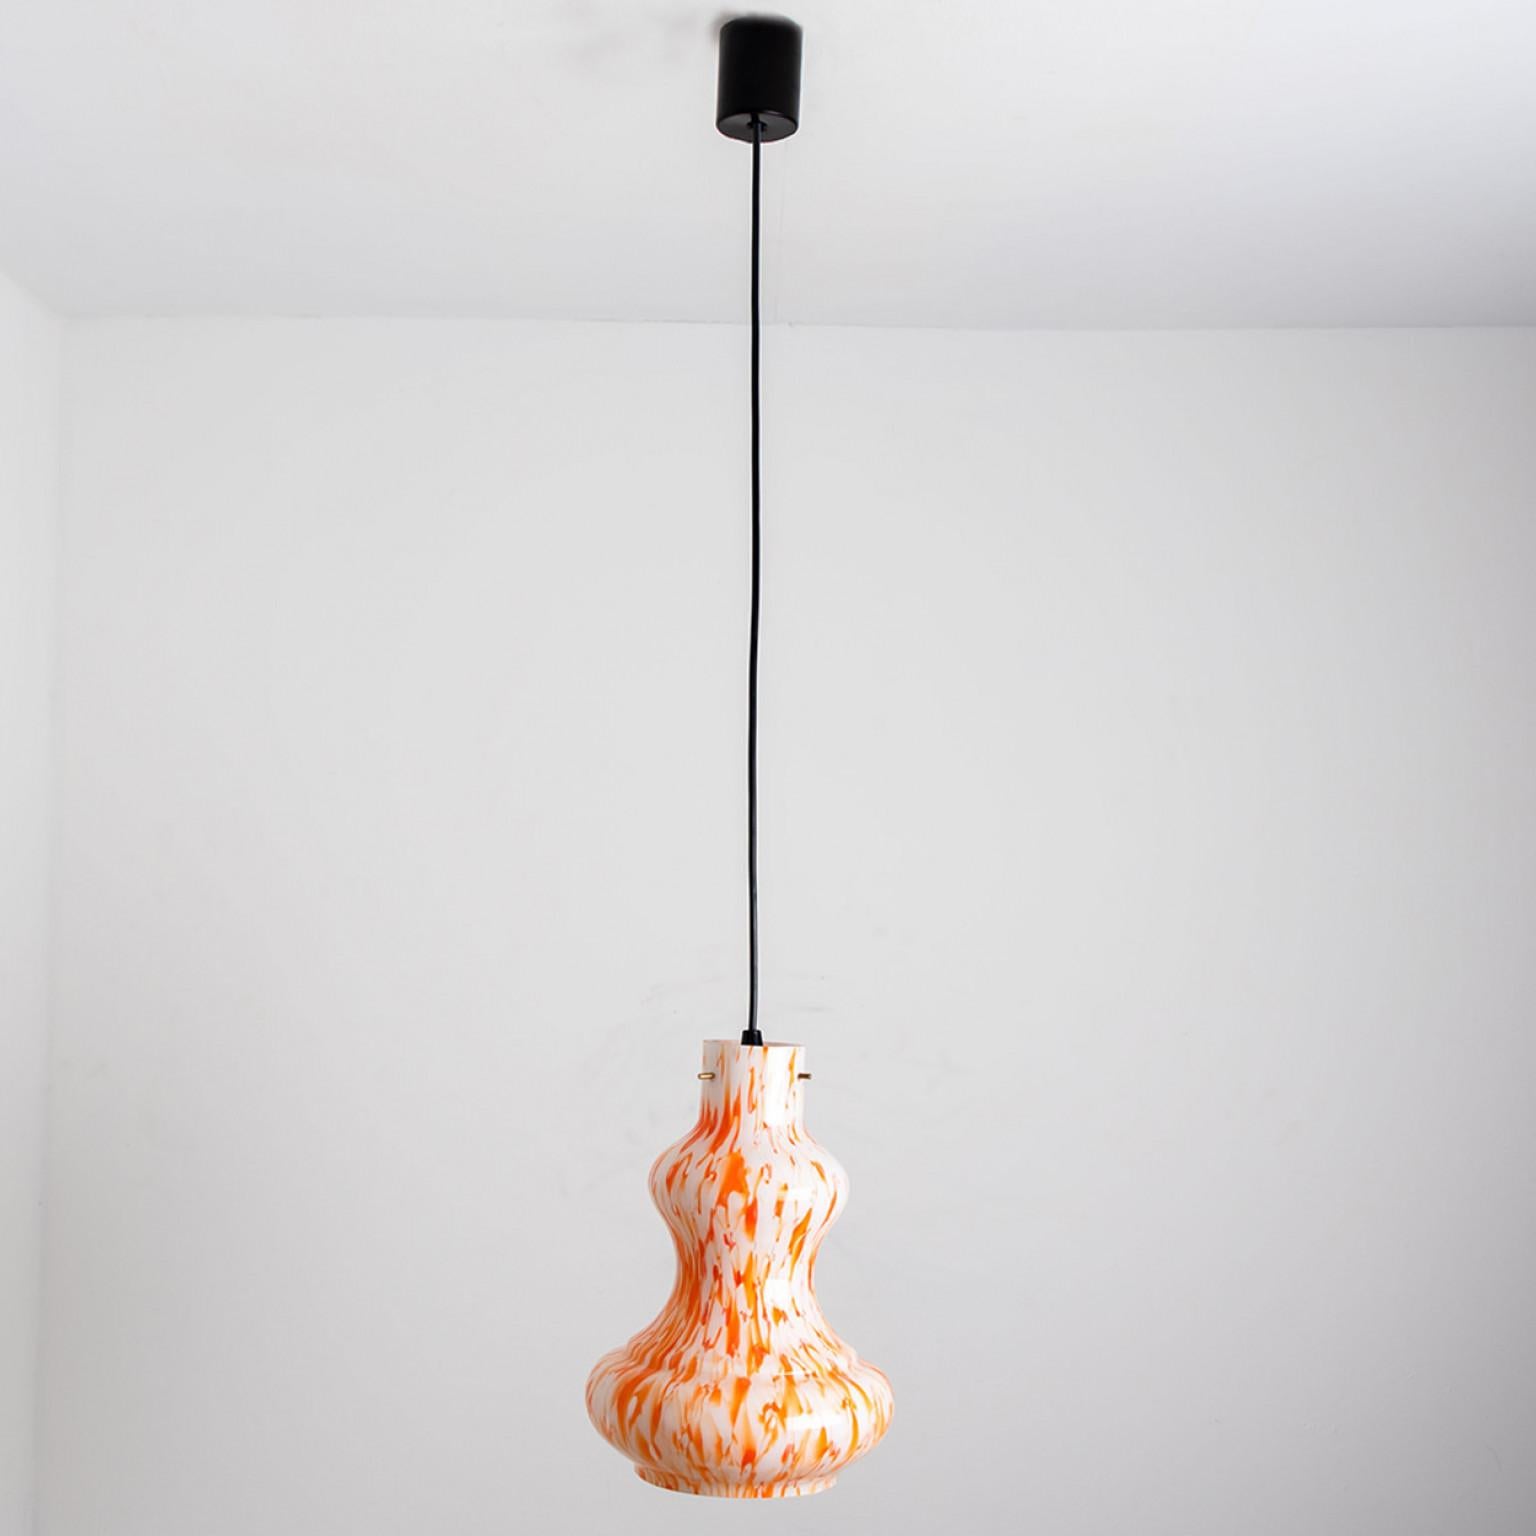 A beautiful and unique orange and white glass pendant light, made in the 1960s by Massimo Vignelli for Venini.
The lampshade is made of orange and white opaline glass with an inner white glaze. Real murano glass, made in Italy.

We have two other